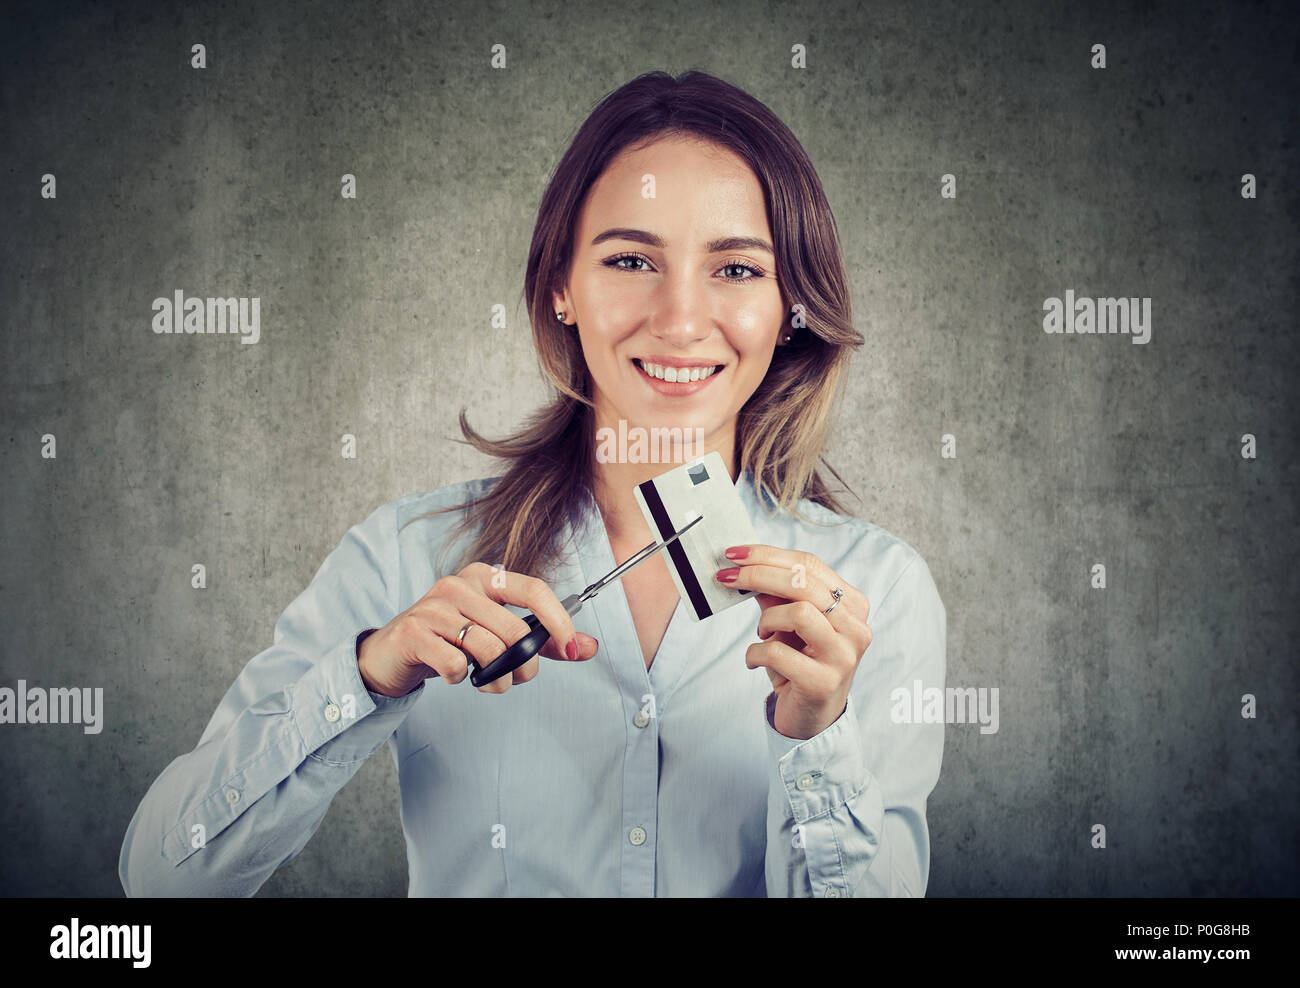 Cheerful young business woman looking happily at camera done with credit cards. Stock Photo